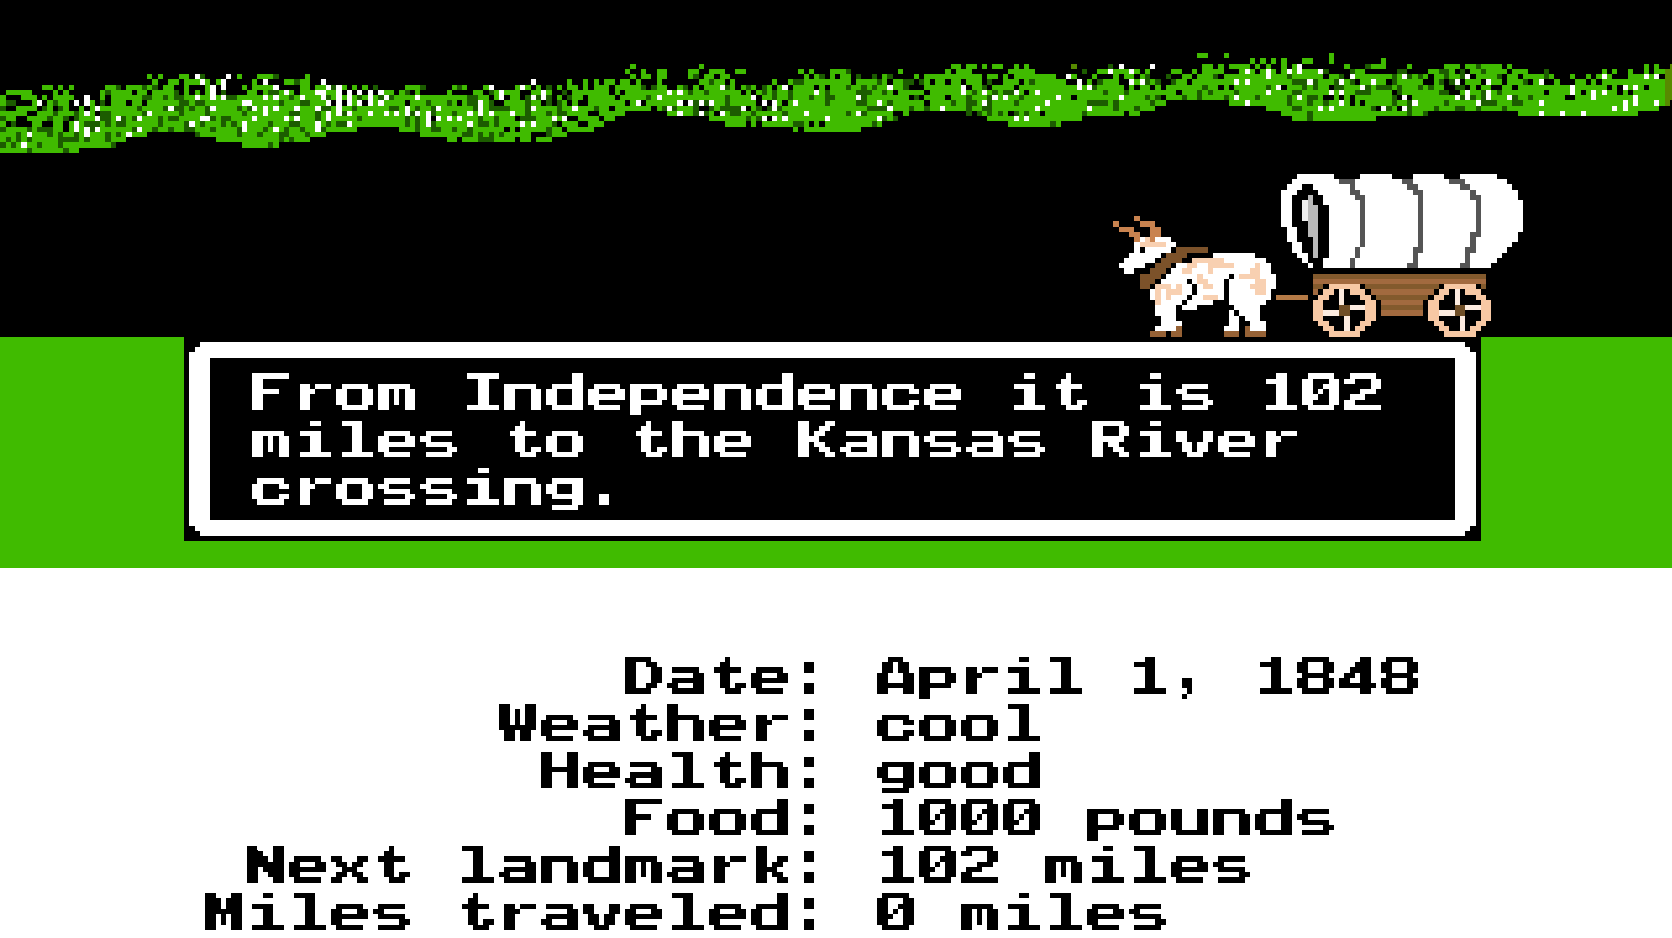 The Lyle, Lyle Crocodile guys are making an Oregon Trail movie musical